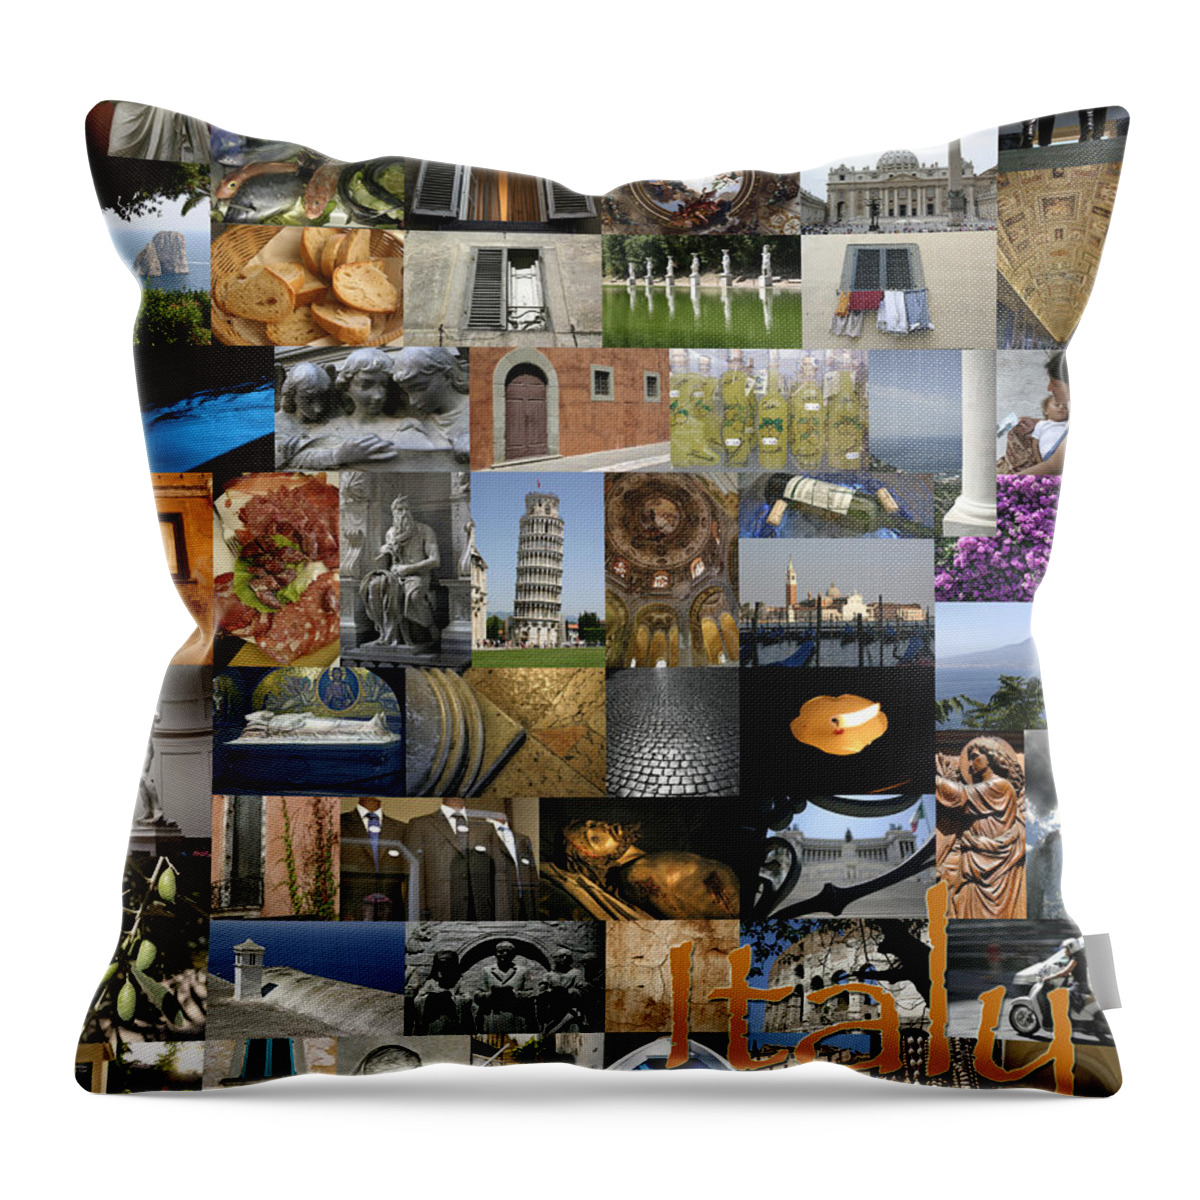 Kg Throw Pillow featuring the photograph Italy Poster by KG Thienemann